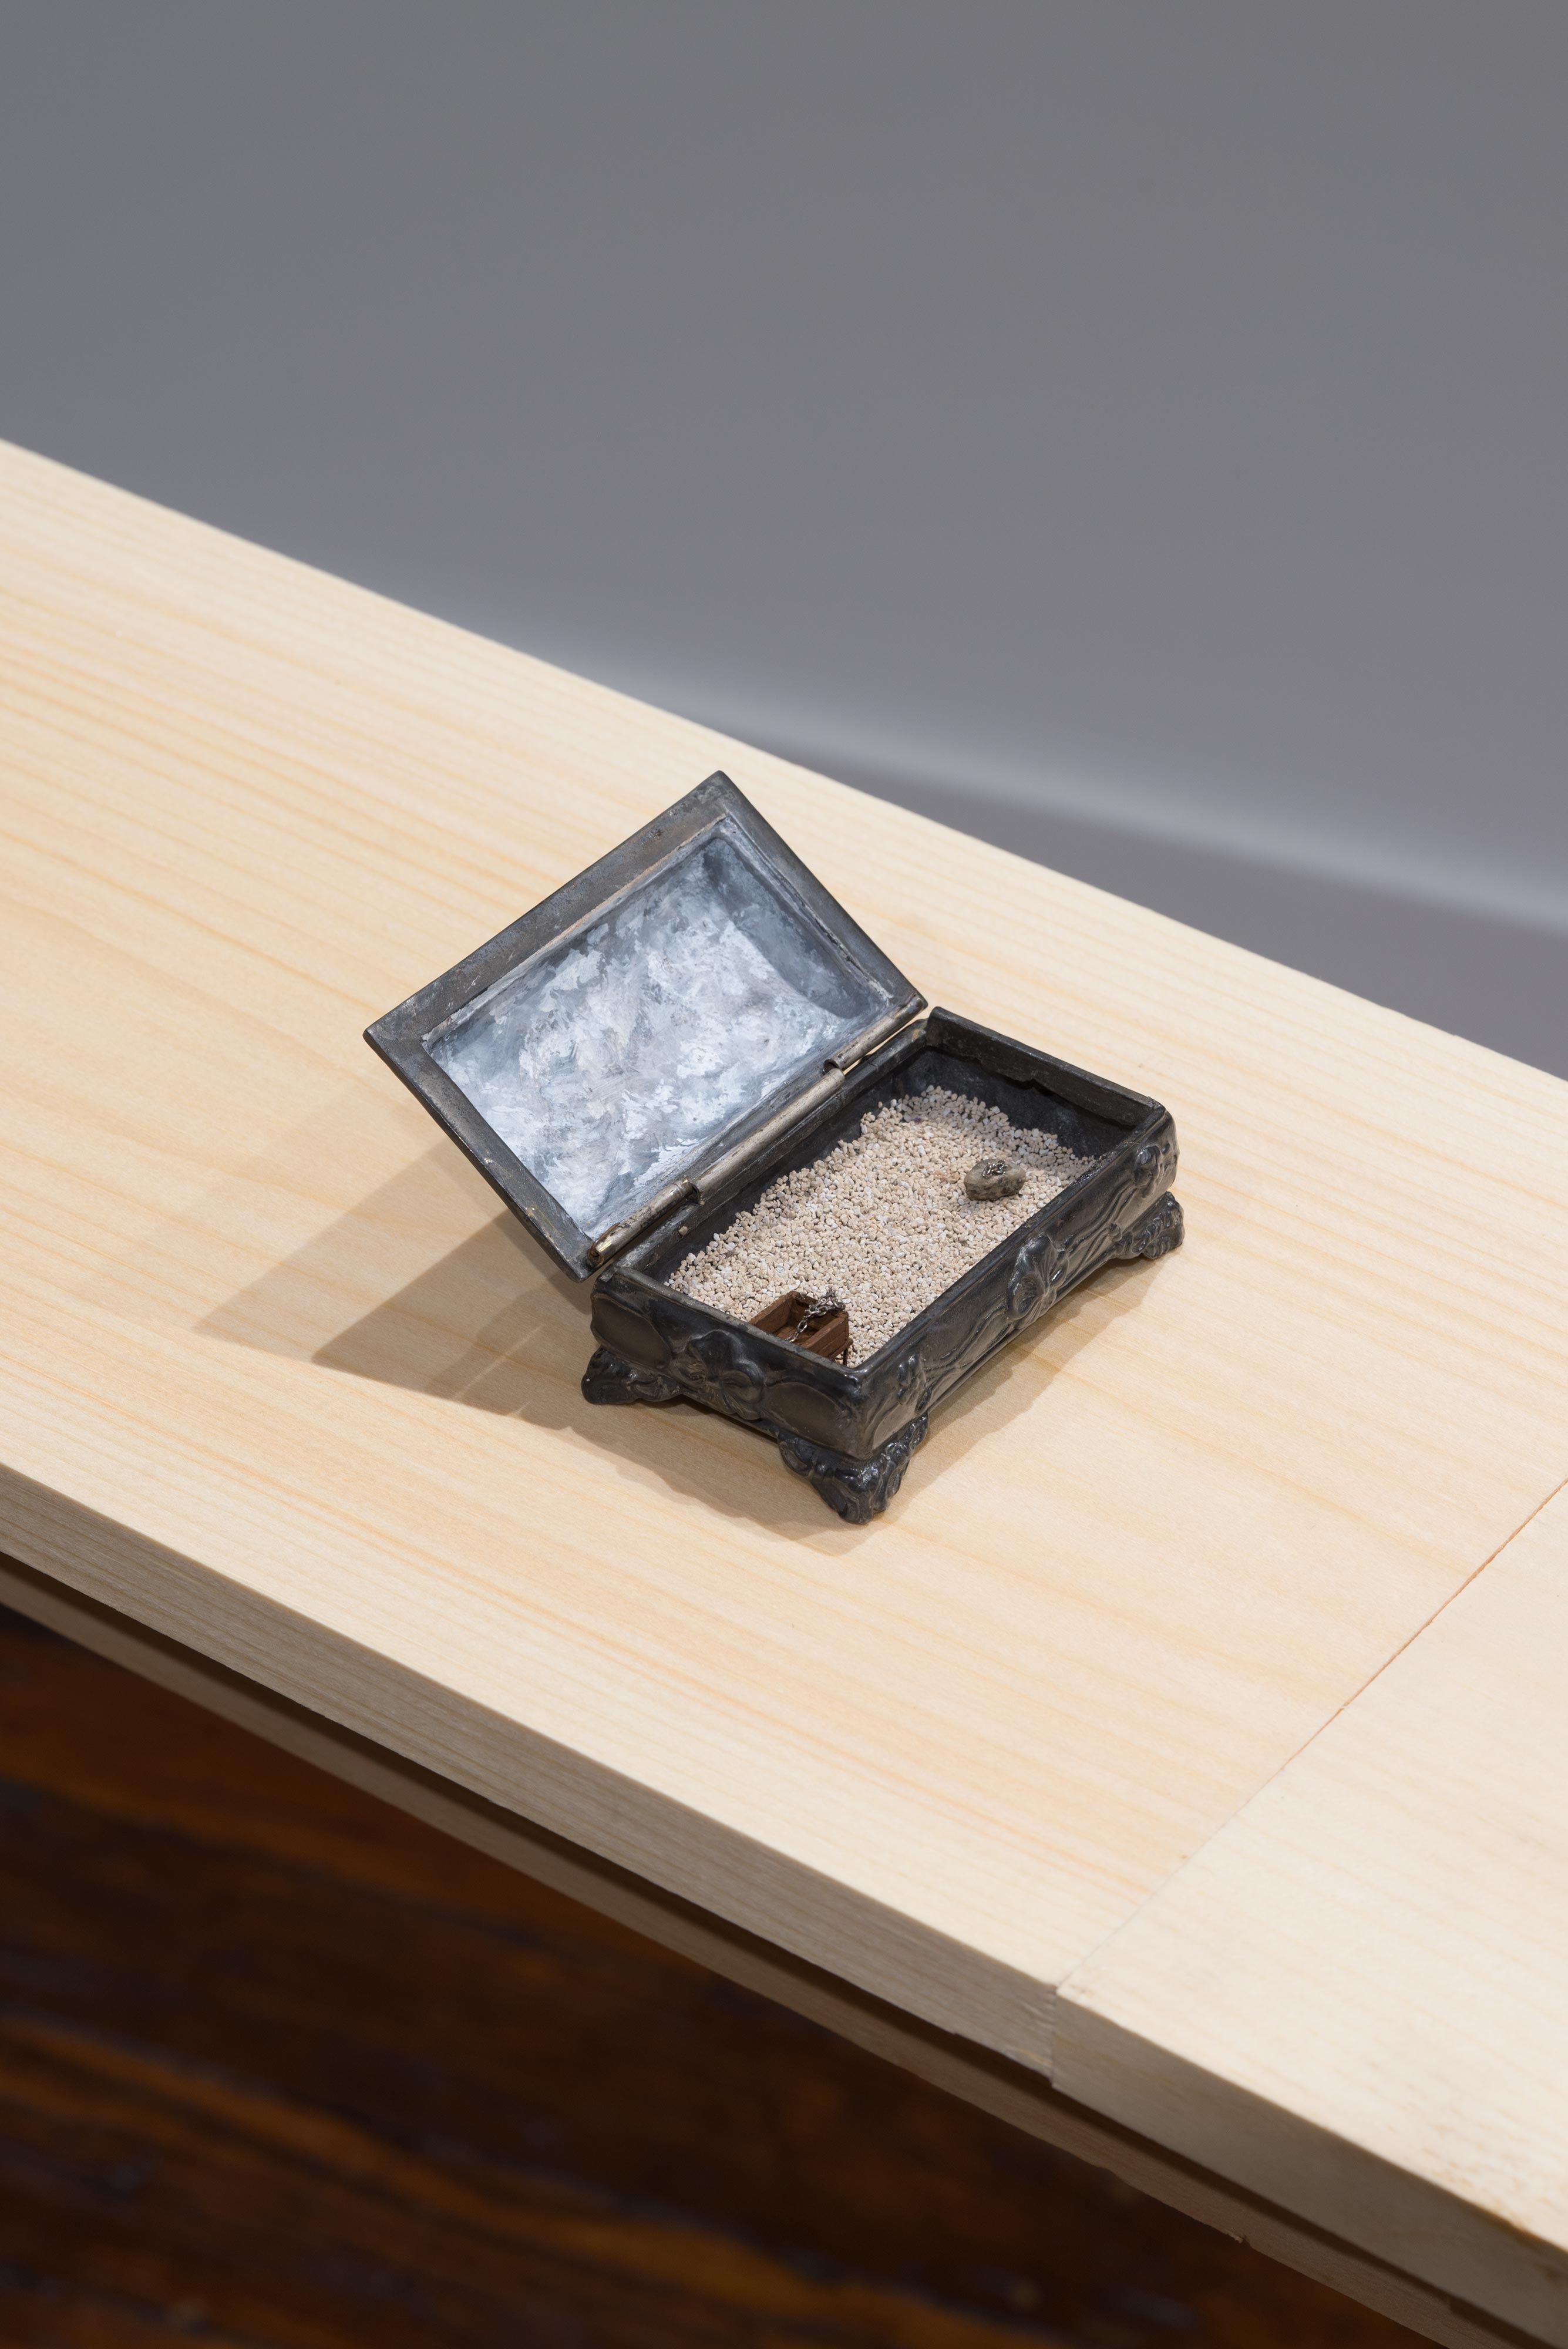 Curtis Talwst Santiago<br>Empty Wagon Leaving Slave Market<br>2016<br>Mixed media diorama in reclaimed jewelry box<br>3.625 x 2.125 x 2.125 in (9.2 x 5.4 x 5.4 cm)